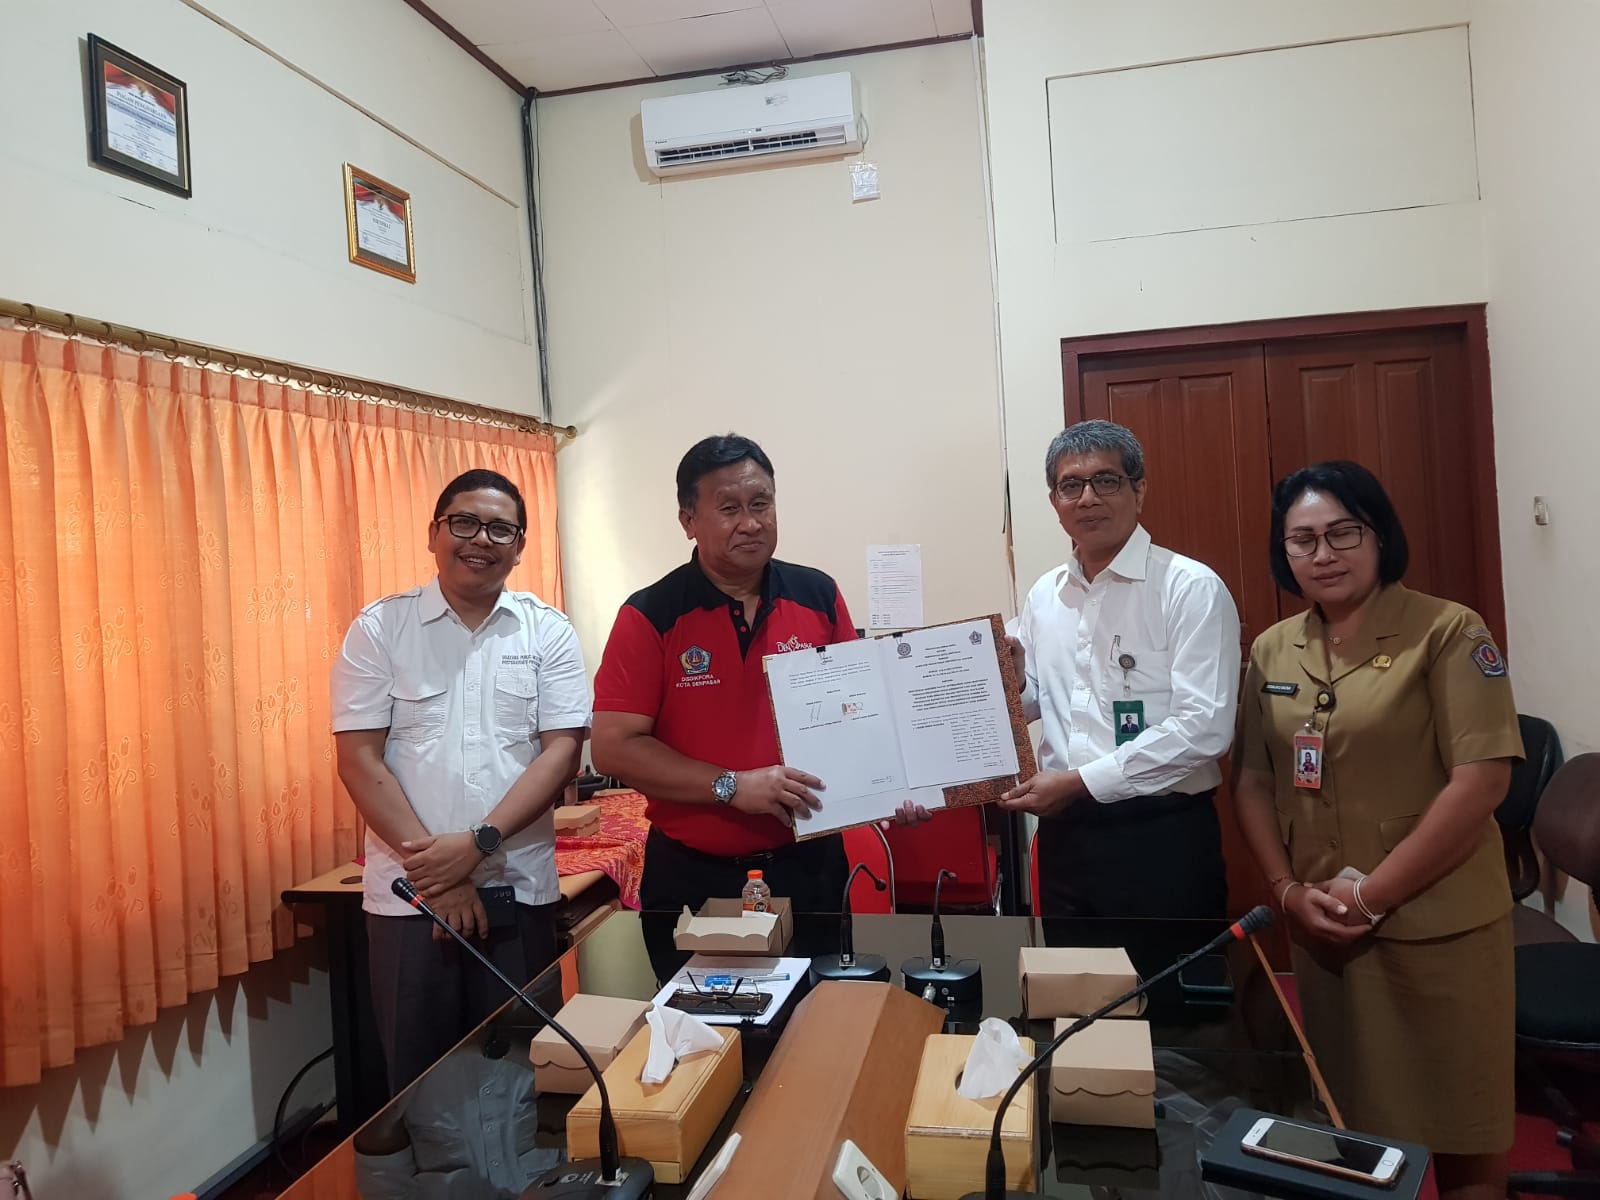 Signing of the Cooperation Agreement of the Faculty of Medicine of Udayana University with the Denpasar City Research and Development Agency